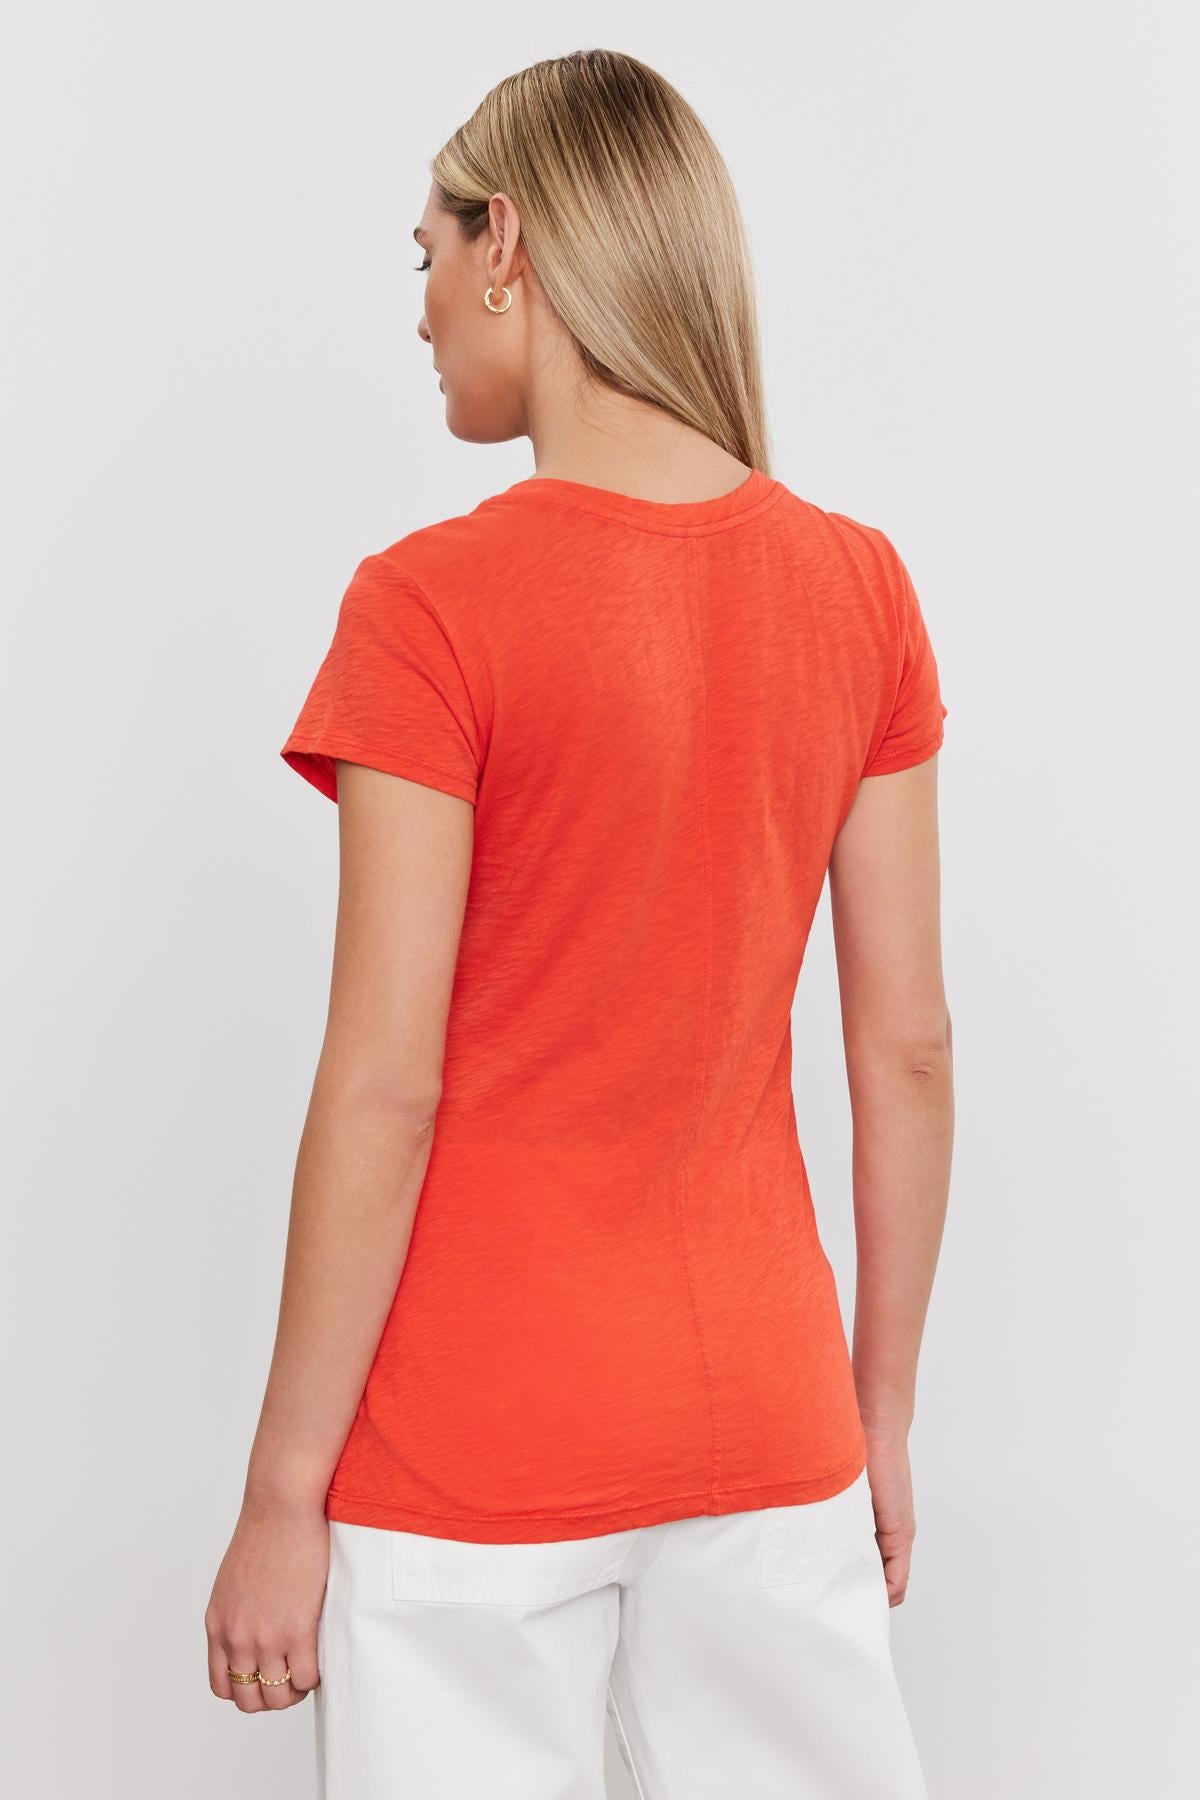   Woman in a bright orange ODELIA COTTON SLUB CREW NECK TEE by Velvet by Graham & Spencer and white pants, viewed from the back. Her hair is styled in a ponytail. 